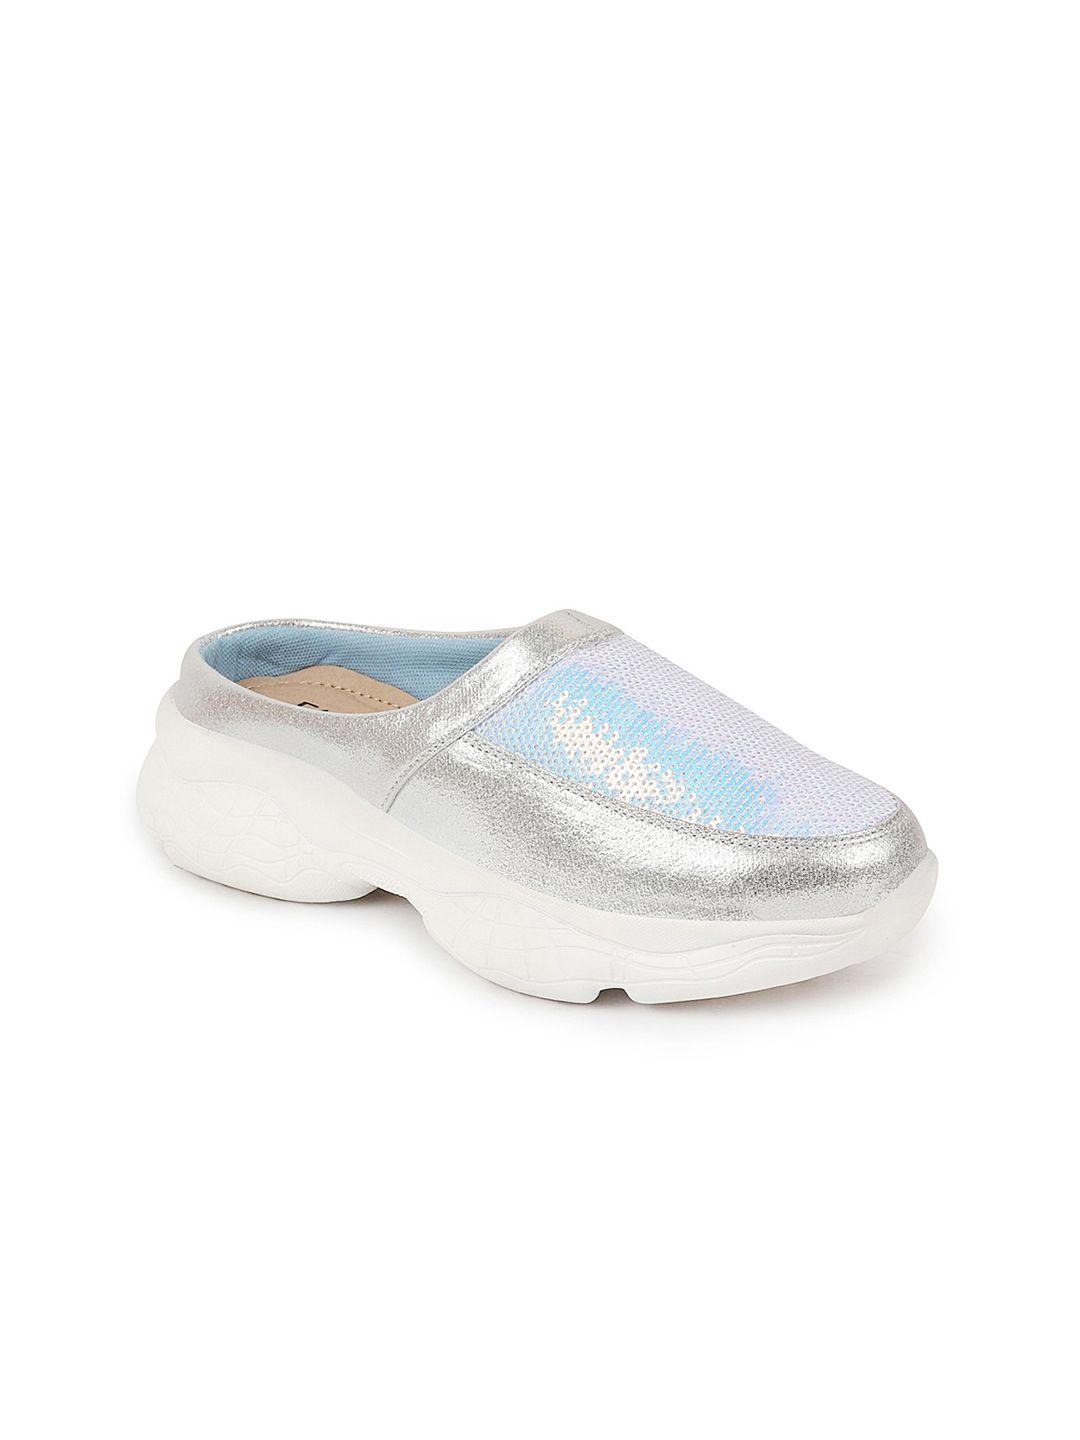 fausto women silver-toned embellished mules flats